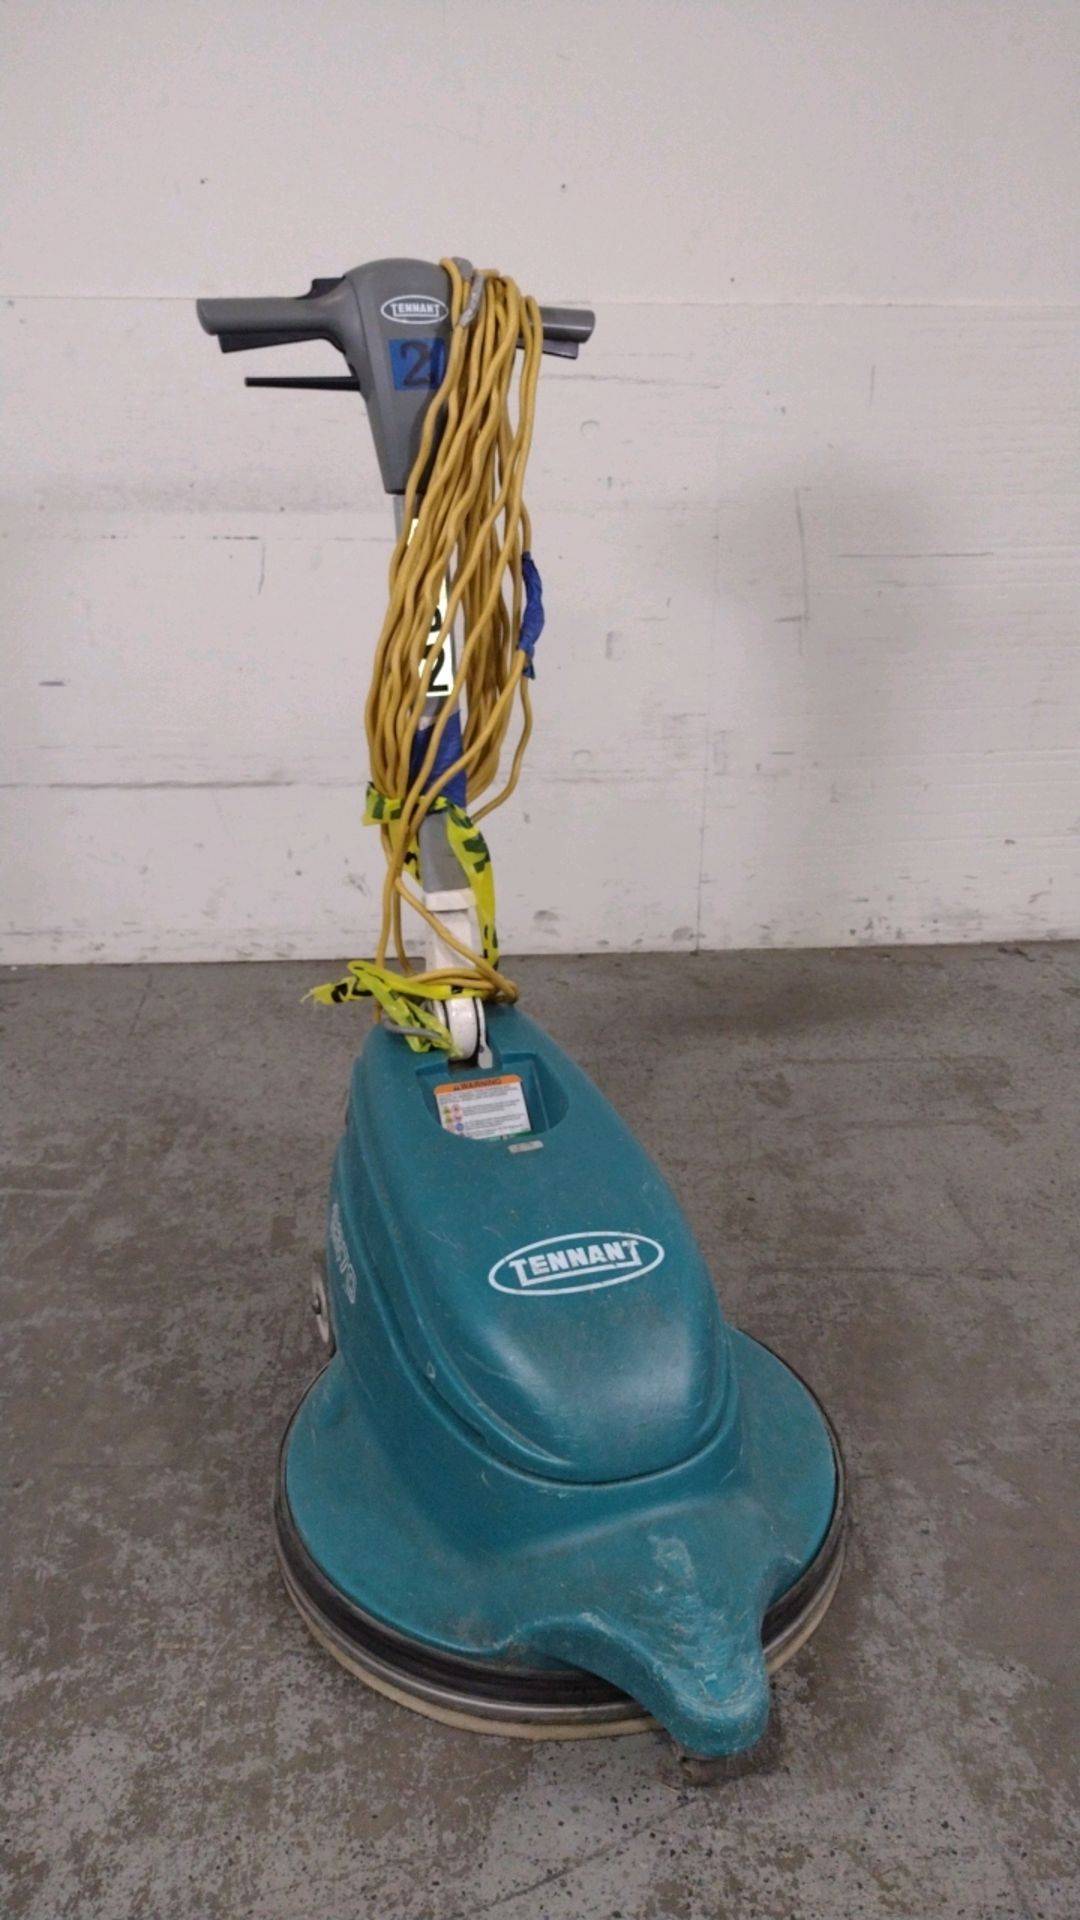 TENNANT 2370 FLOOR BURNISHER (LOCATED AT 1825 S. 43RD AVE, SUITE B2, PHOENIX, AZ 85009)